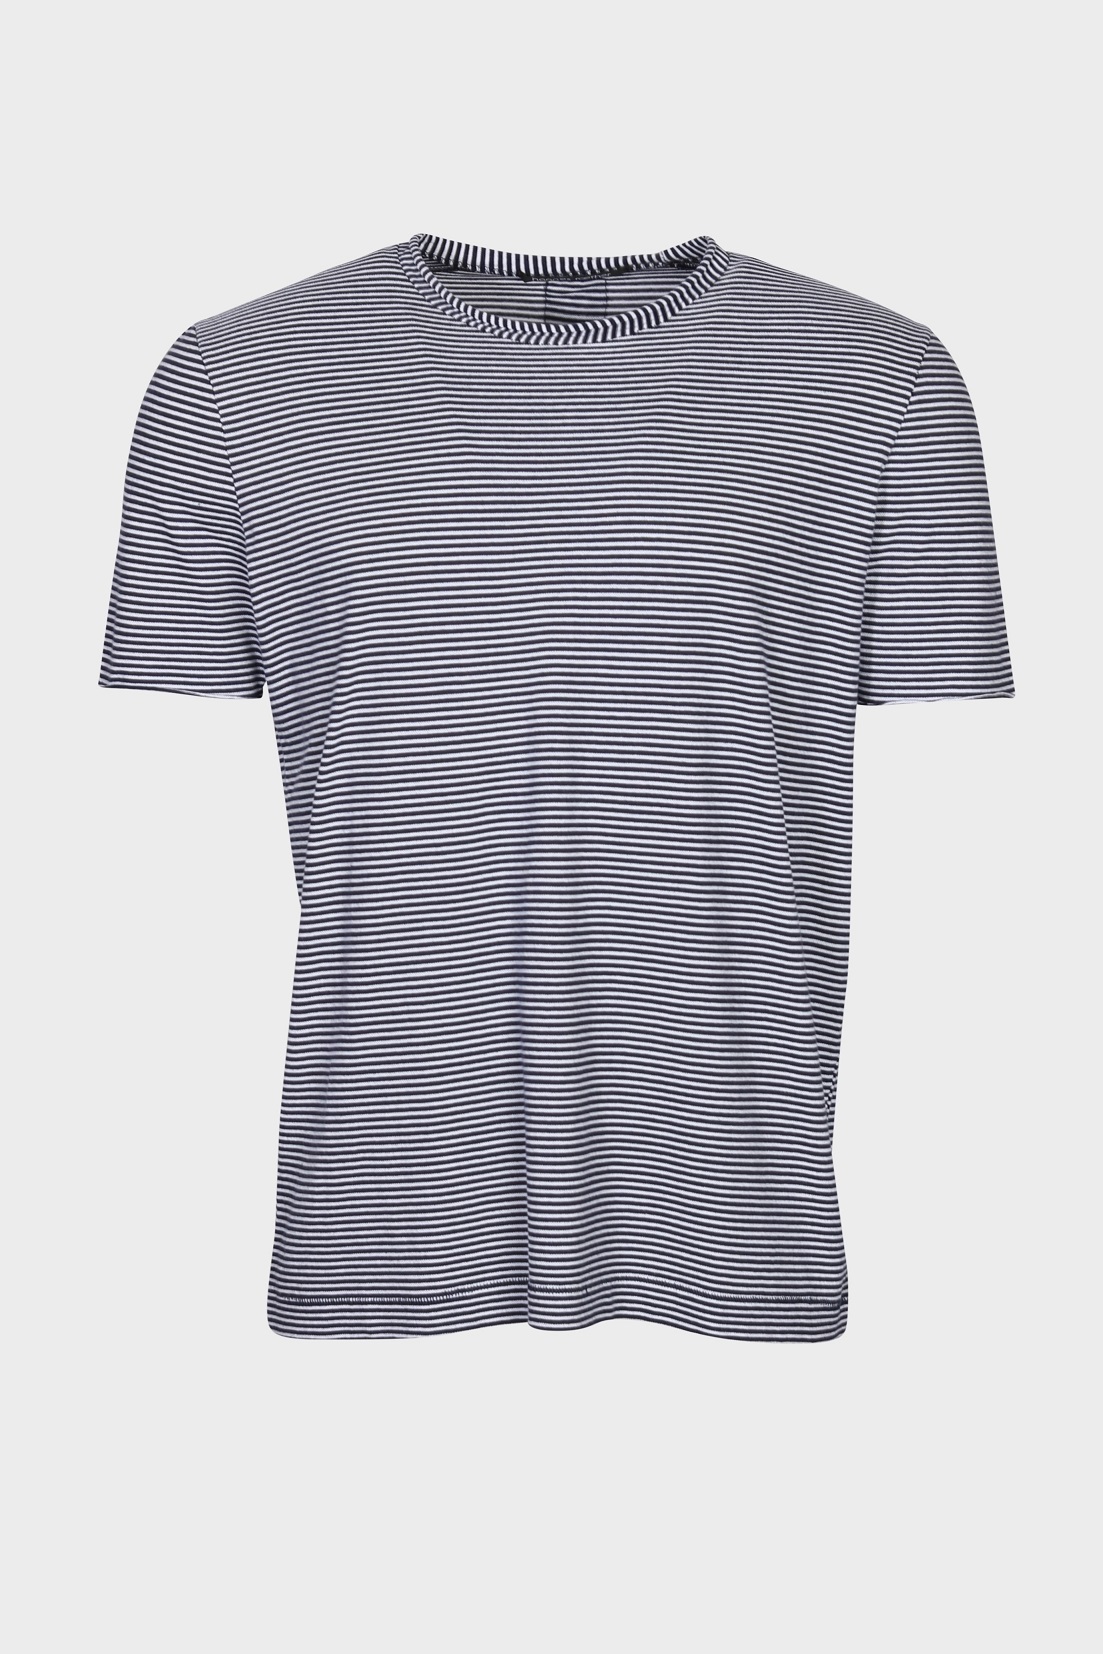 HANNES ROETHER T-Shirt in Navy/White Stripes 3XL